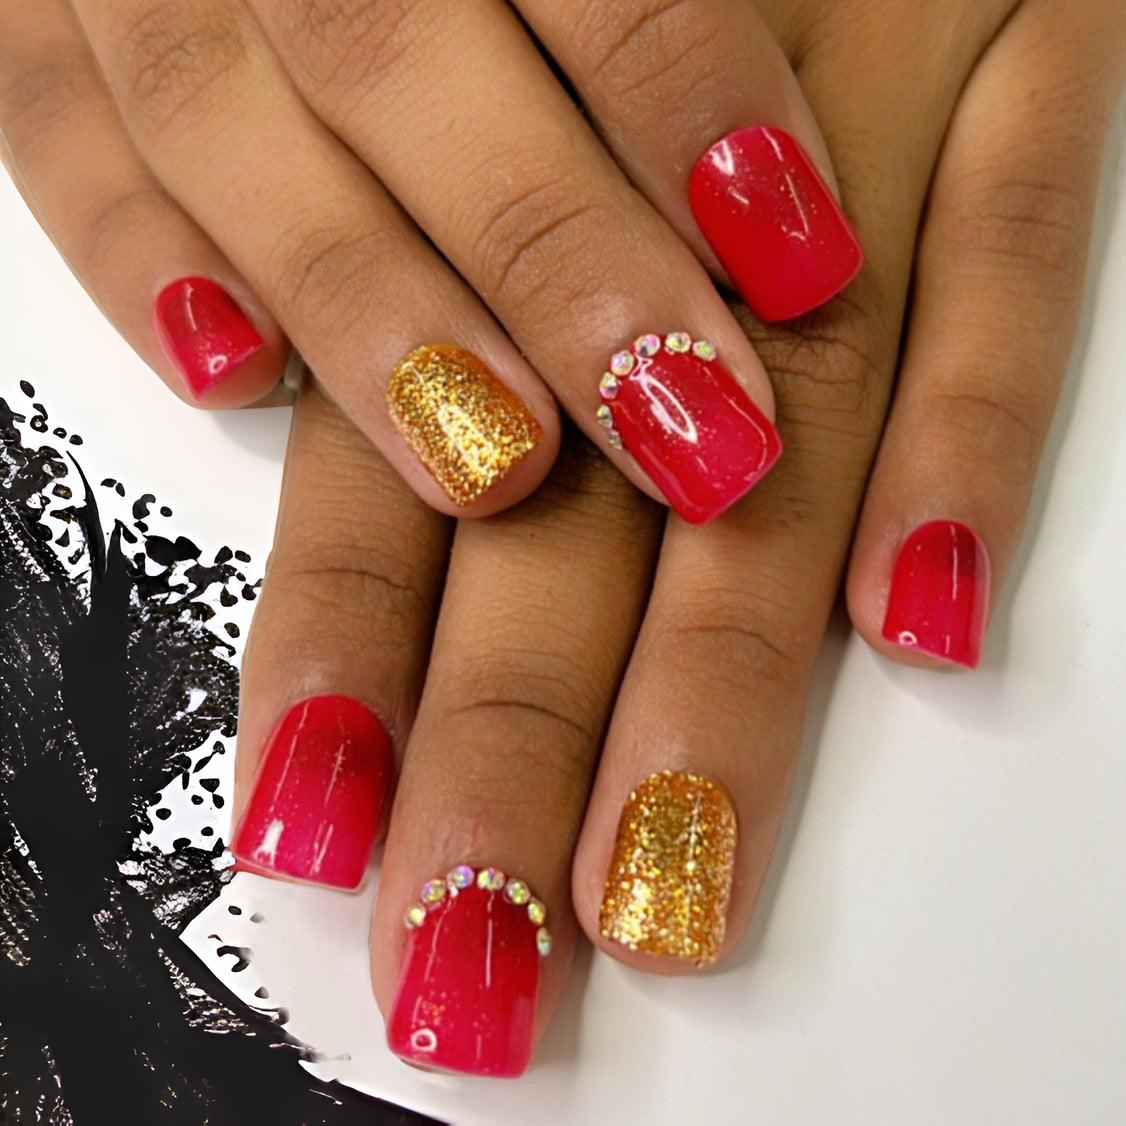 LHHYY Nail Bridal Wedding Beauty Full Cover Nail Art Tips with Women Simple  Fashion Red Color Gold False Nails : Amazon.ca: Beauty & Personal Care